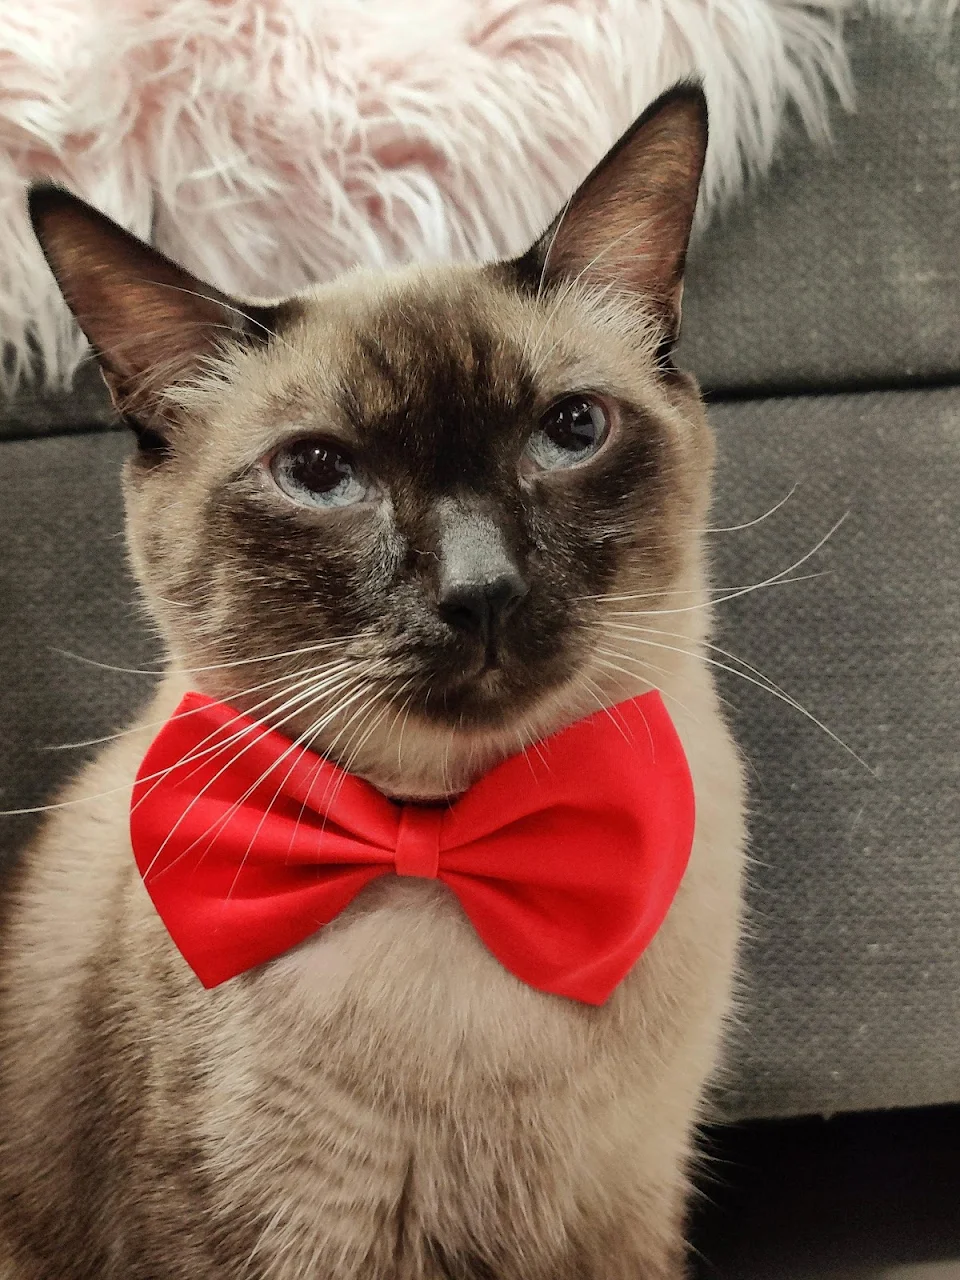 Sir Timothy looking very dapper in his new bow tie